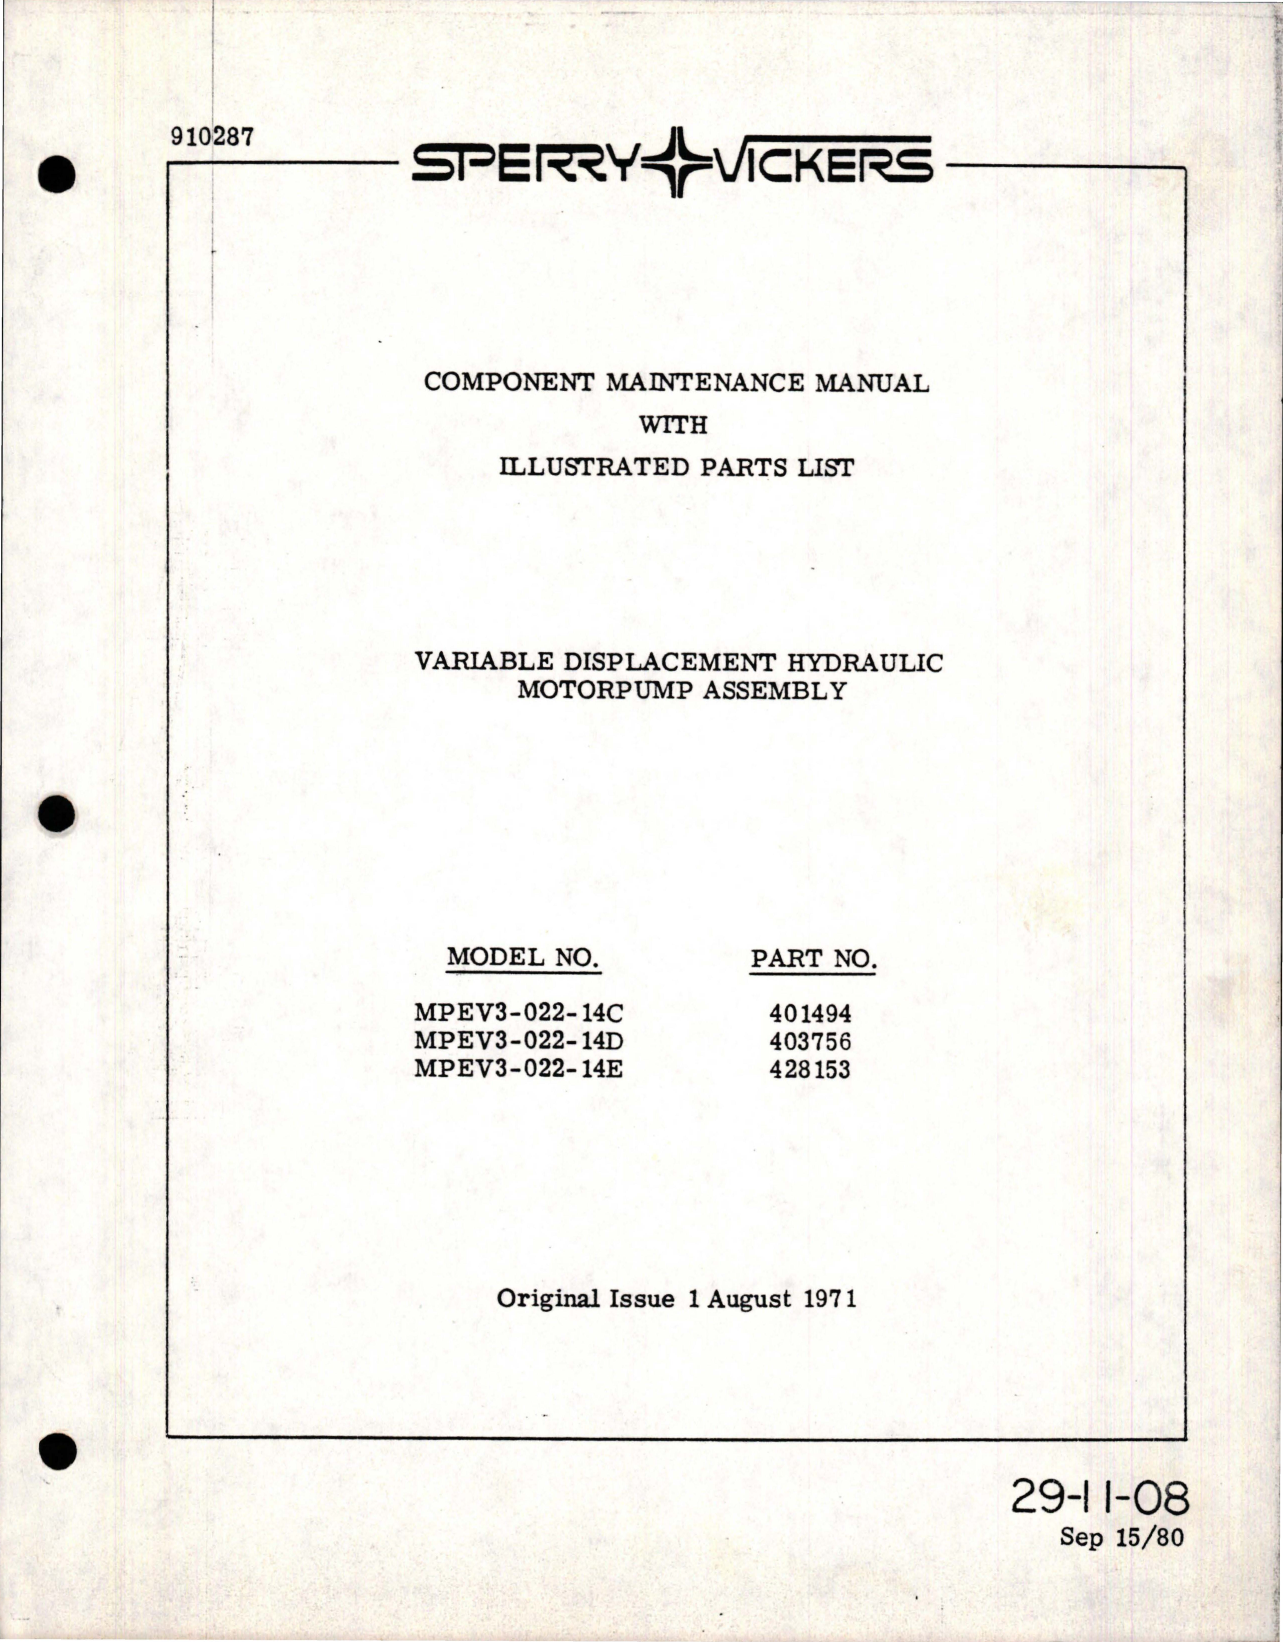 Sample page 1 from AirCorps Library document: Maintenance Manual with Illustrated Parts List for Variable Displacement Hydraulic Motorpump Assy - Model MPEV3-022-14C, MPEV3-022-14D, and MPEV3-022-14E